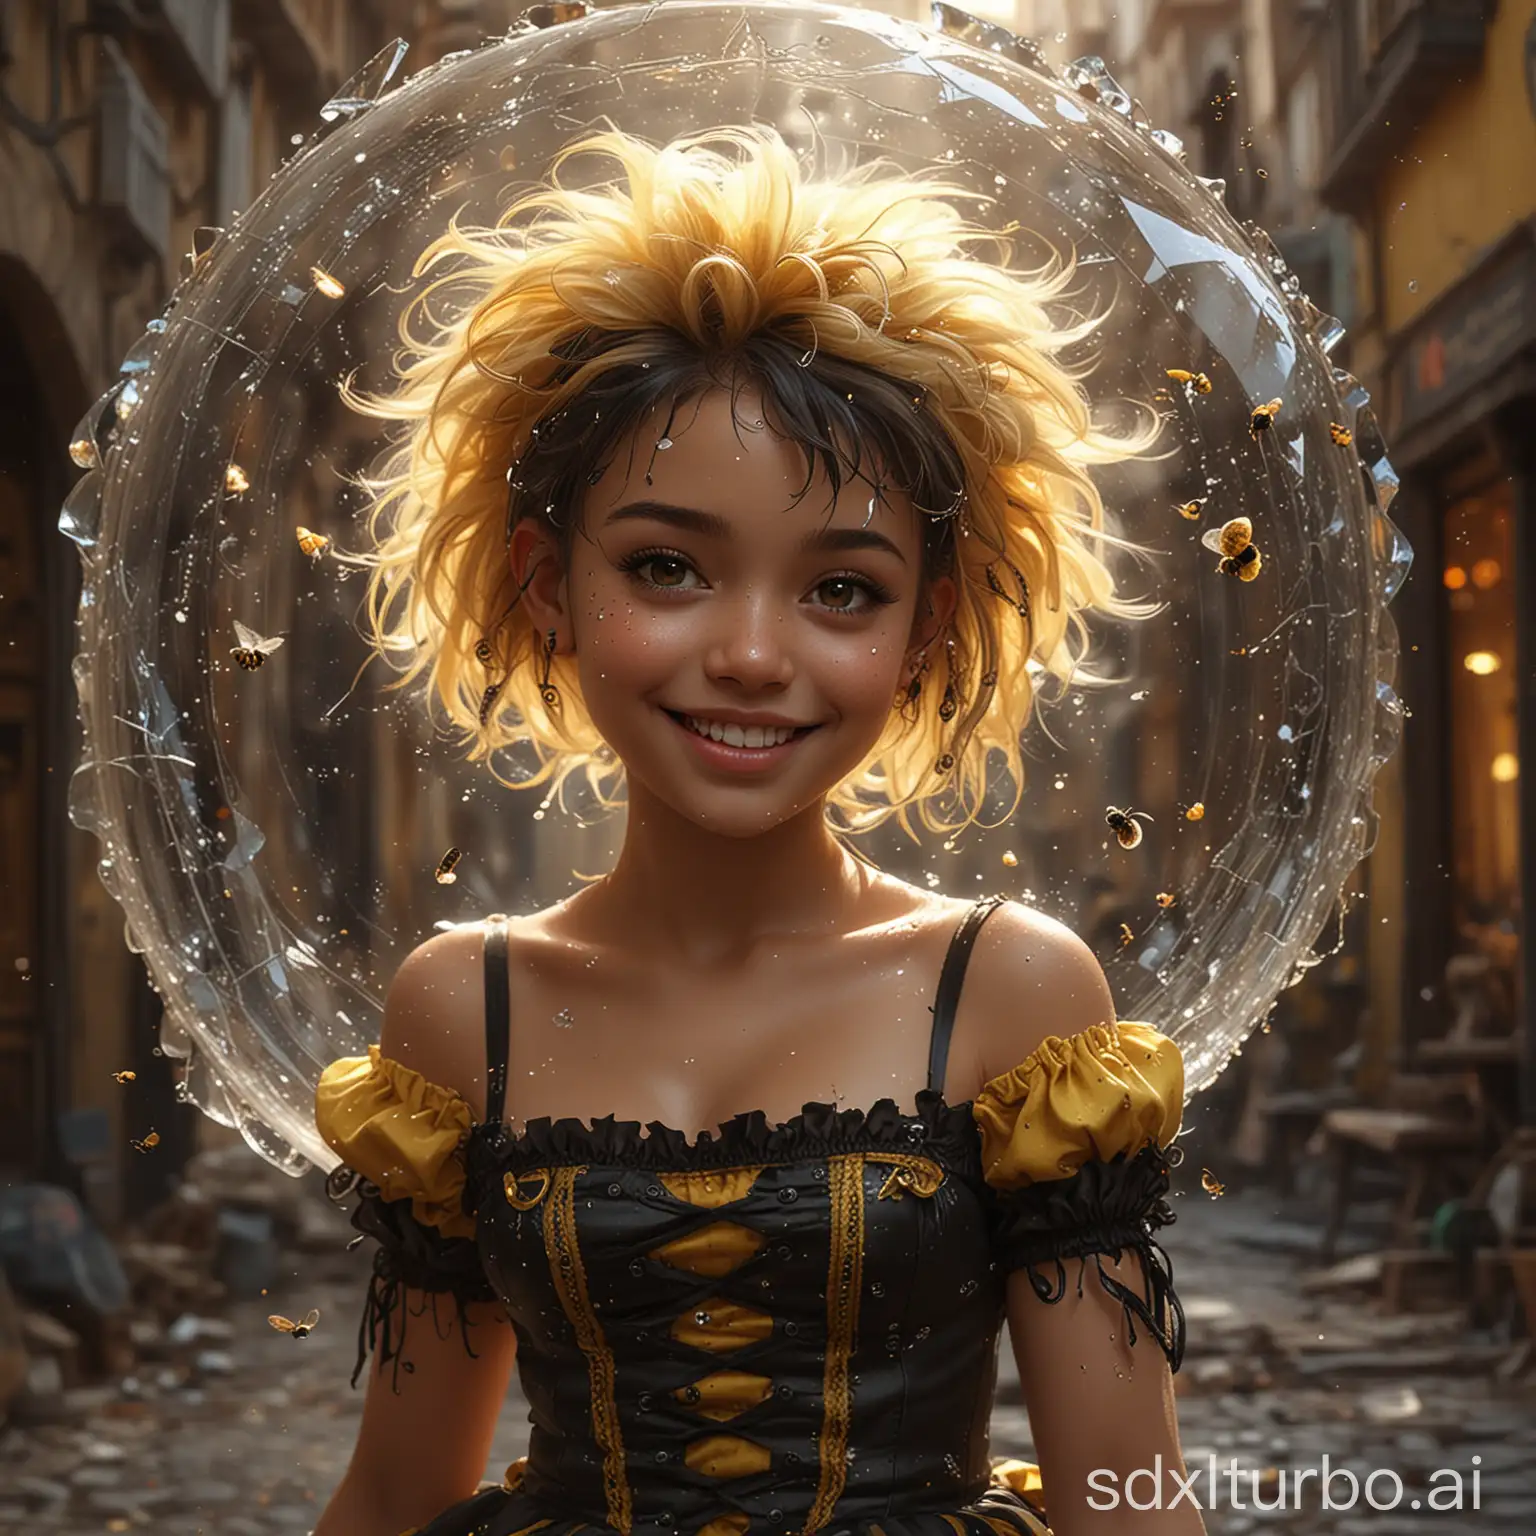 cute little women 20 years old in honey bee carnival dress, tanned skin, happy smile, full body, Luis Royo's house an ultra HD detailed painting, digital art, shaggy upswept black-yellow hair, realistic, Art by Daniela Uhlig and Tatiana Suarez, a tattooed punk beauty, bright smile, cute little baby girl honey bee dress beautiful, splash, glittering, cute and adorable, filigree, rim lighting, lights, extremely magical, surreal, fantasy, digital art, wlop, Broken Glass effect, stunning